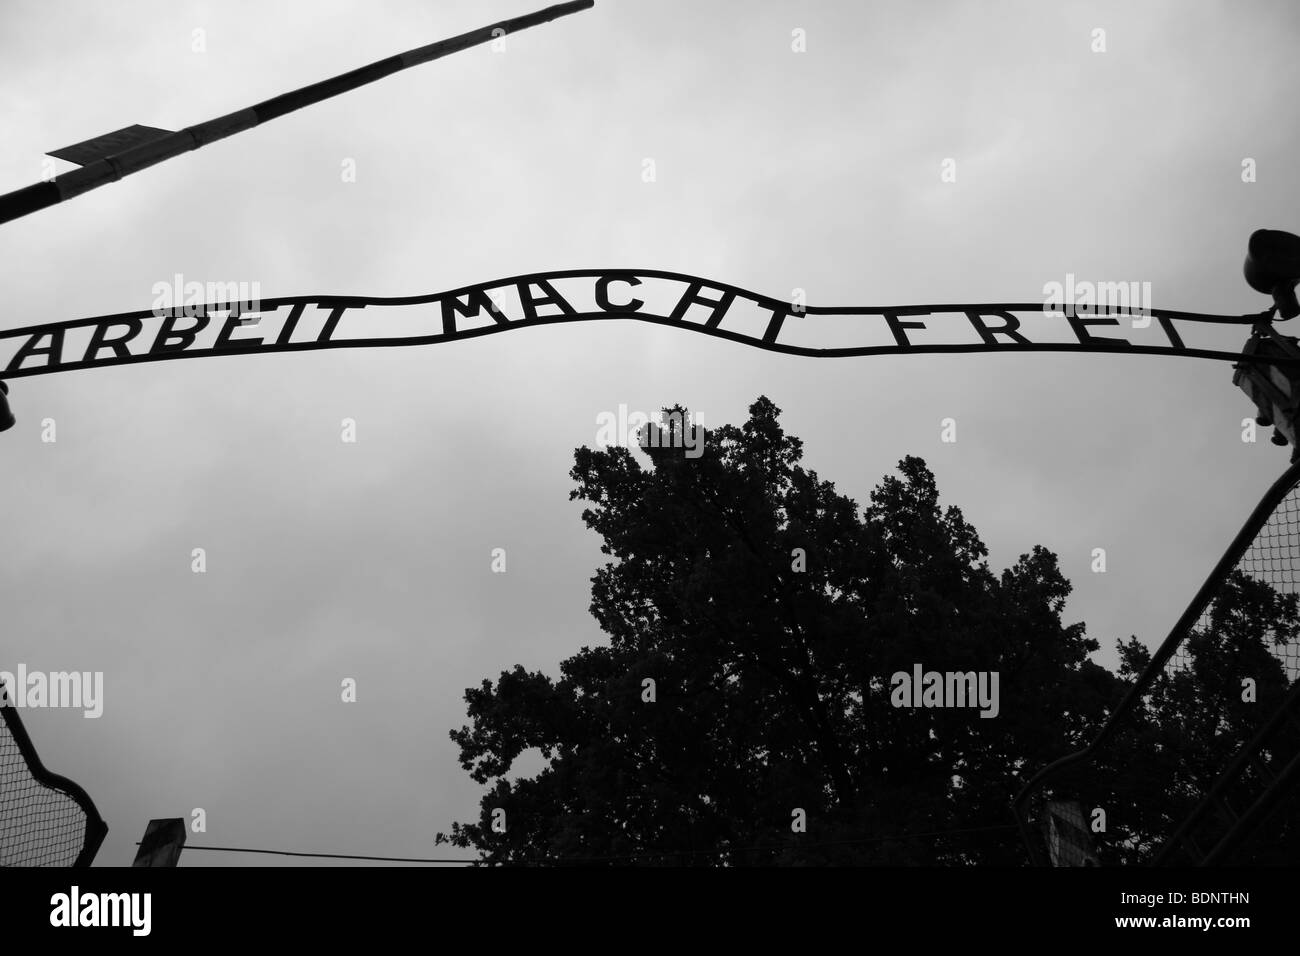 The 'Arbeit Macht Frei' or 'work brings freedom' sign above the entrance gate to the Auschwitz death camp, Oswiecim, Poland. Stock Photo